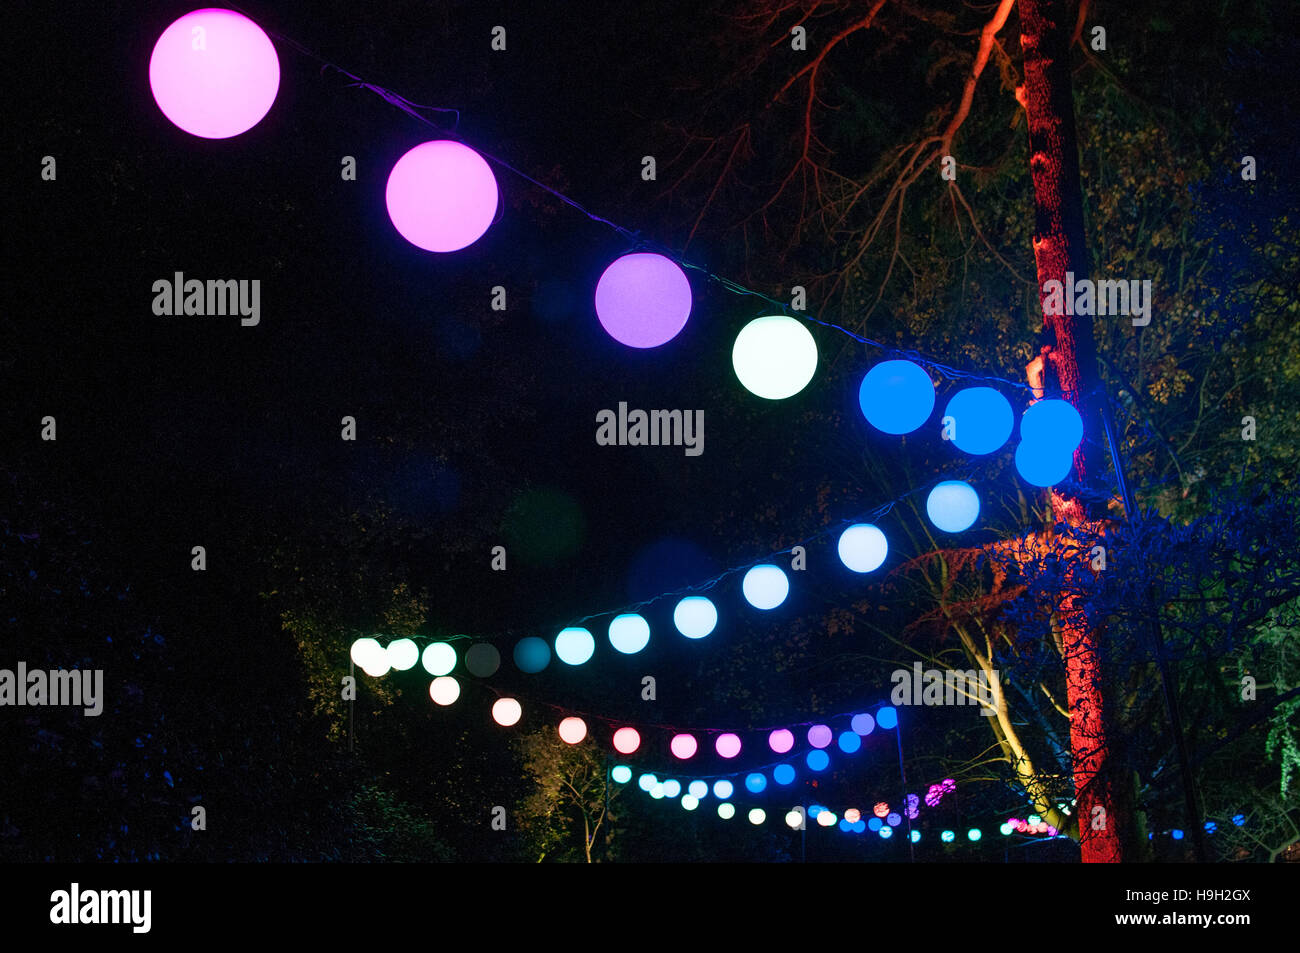 London, UK. 22nd Nov, 2016. Circular illuminations hang between trees as part of Christmas at Kew, London. UK. More than 60,000 lights illuminate the trees, plants and gardens. The trail is more than a mile long and includes artworks from both UK and international artists and designers. The show opens 23rd November 2016 and closes 2nd January 2017. Credit:  Tricia de Courcy Ling/Alamy Live News Stock Photo